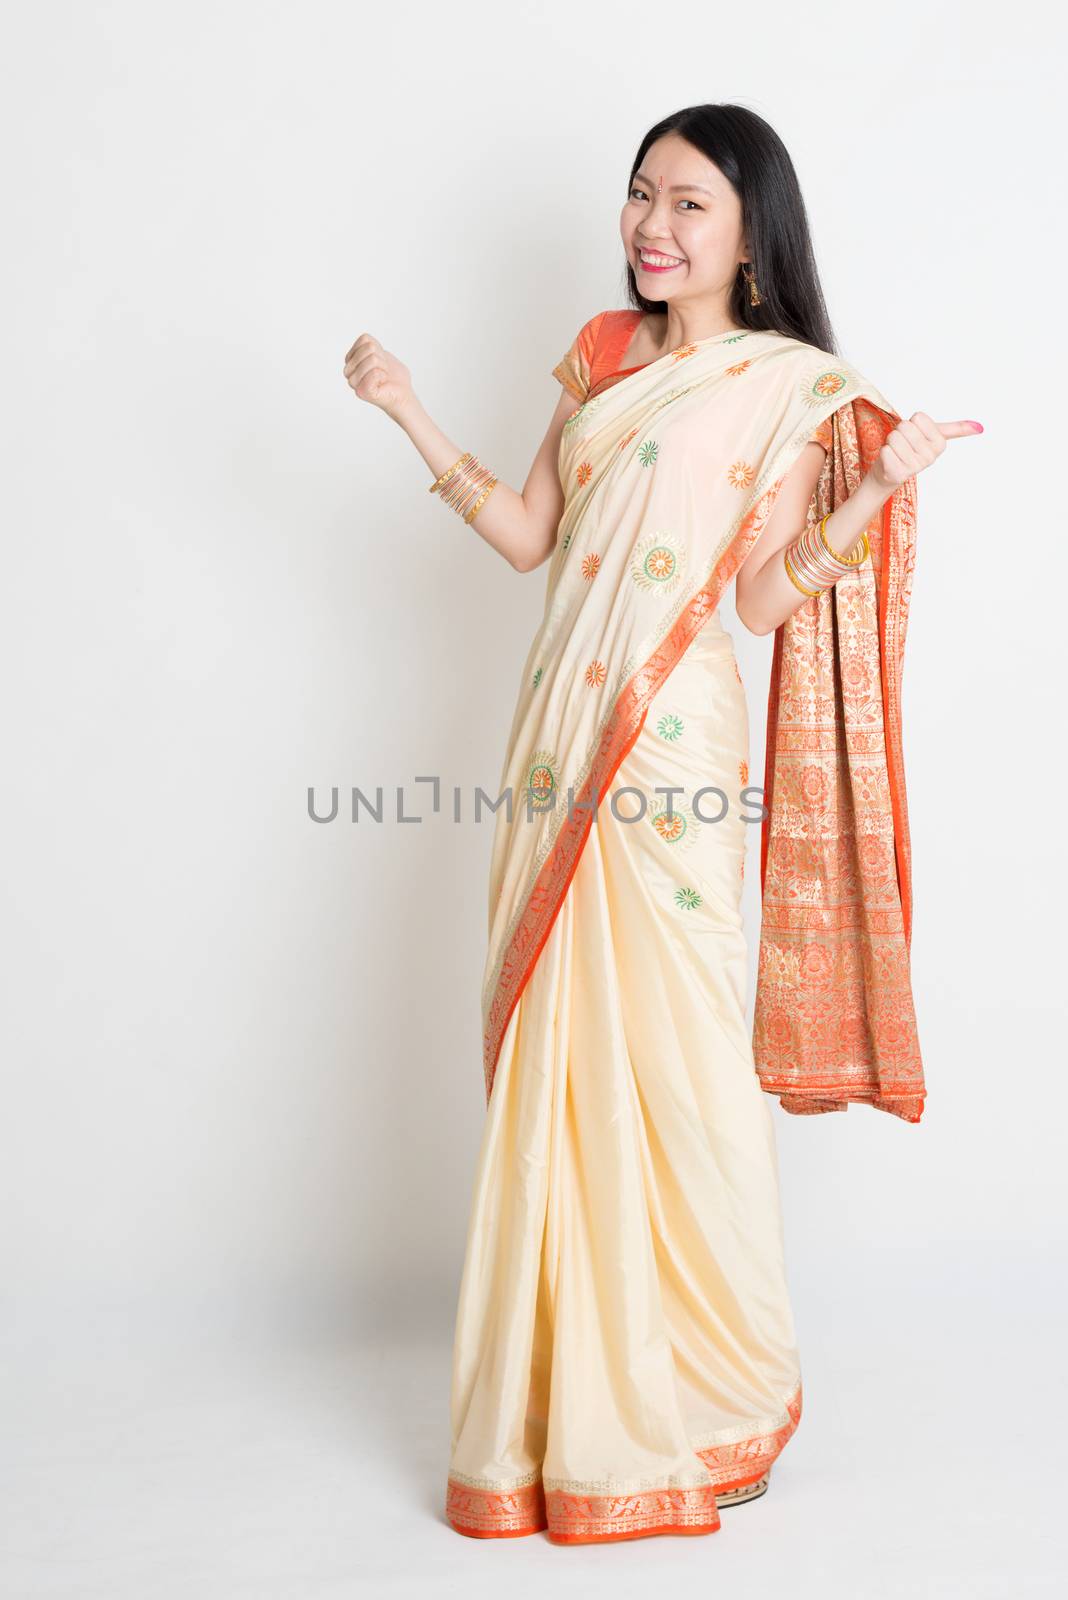 Woman in Indian sari dress thumbs up by szefei